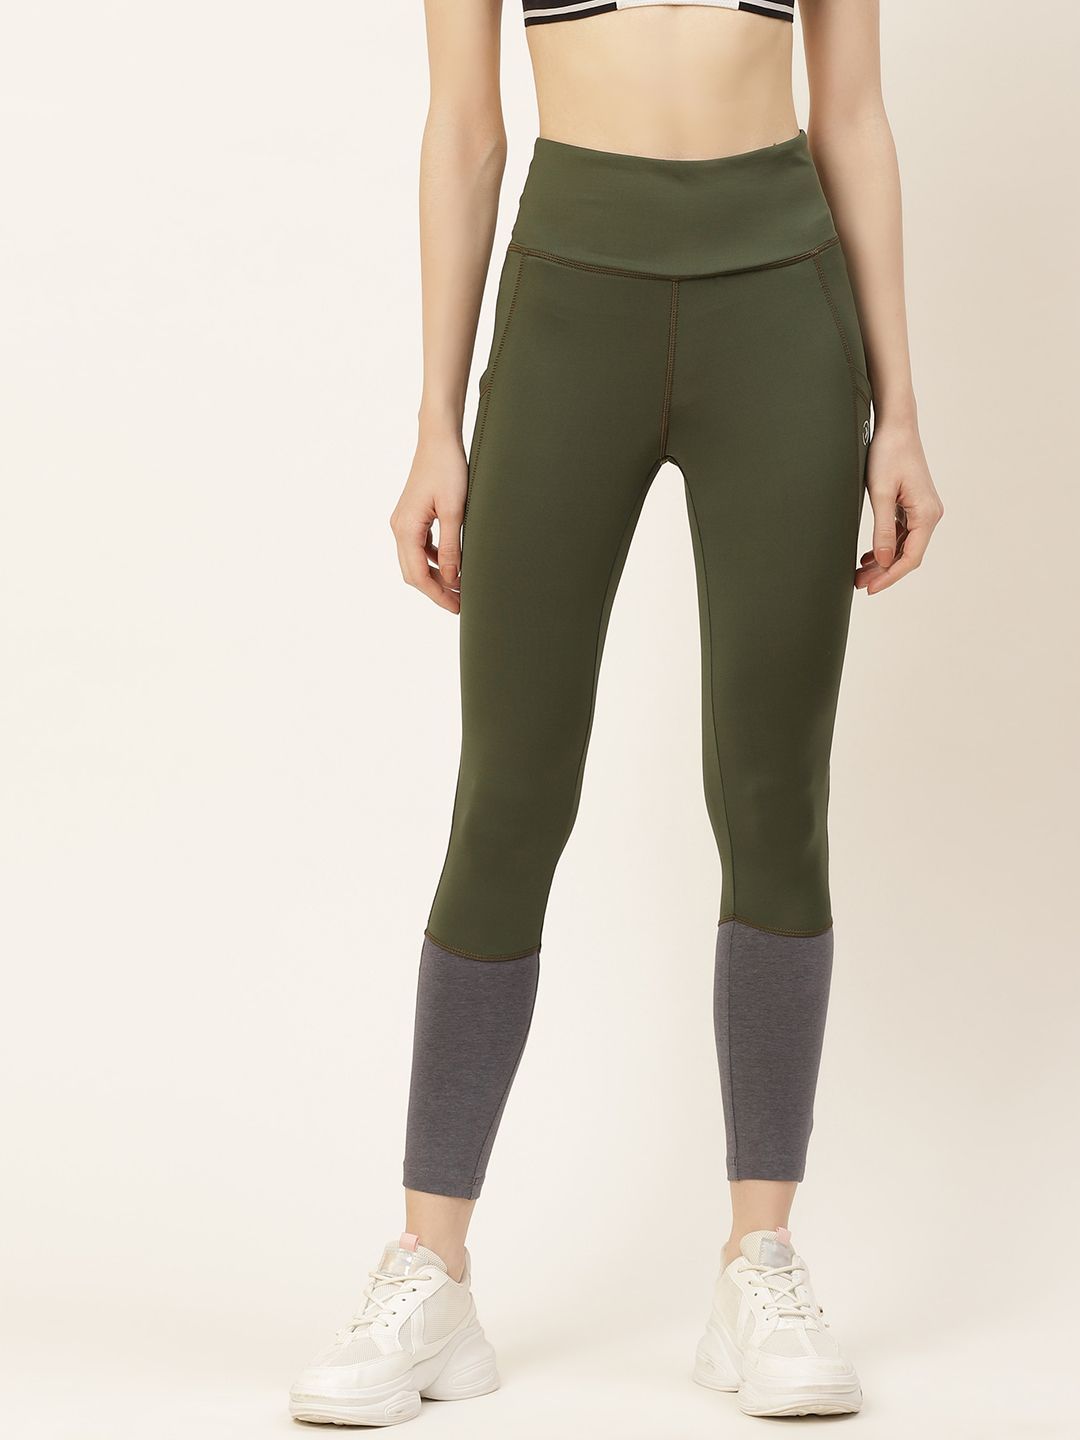 KICA Women Olive Green High Waisted Leggings With Pockets & Medium Support Price in India